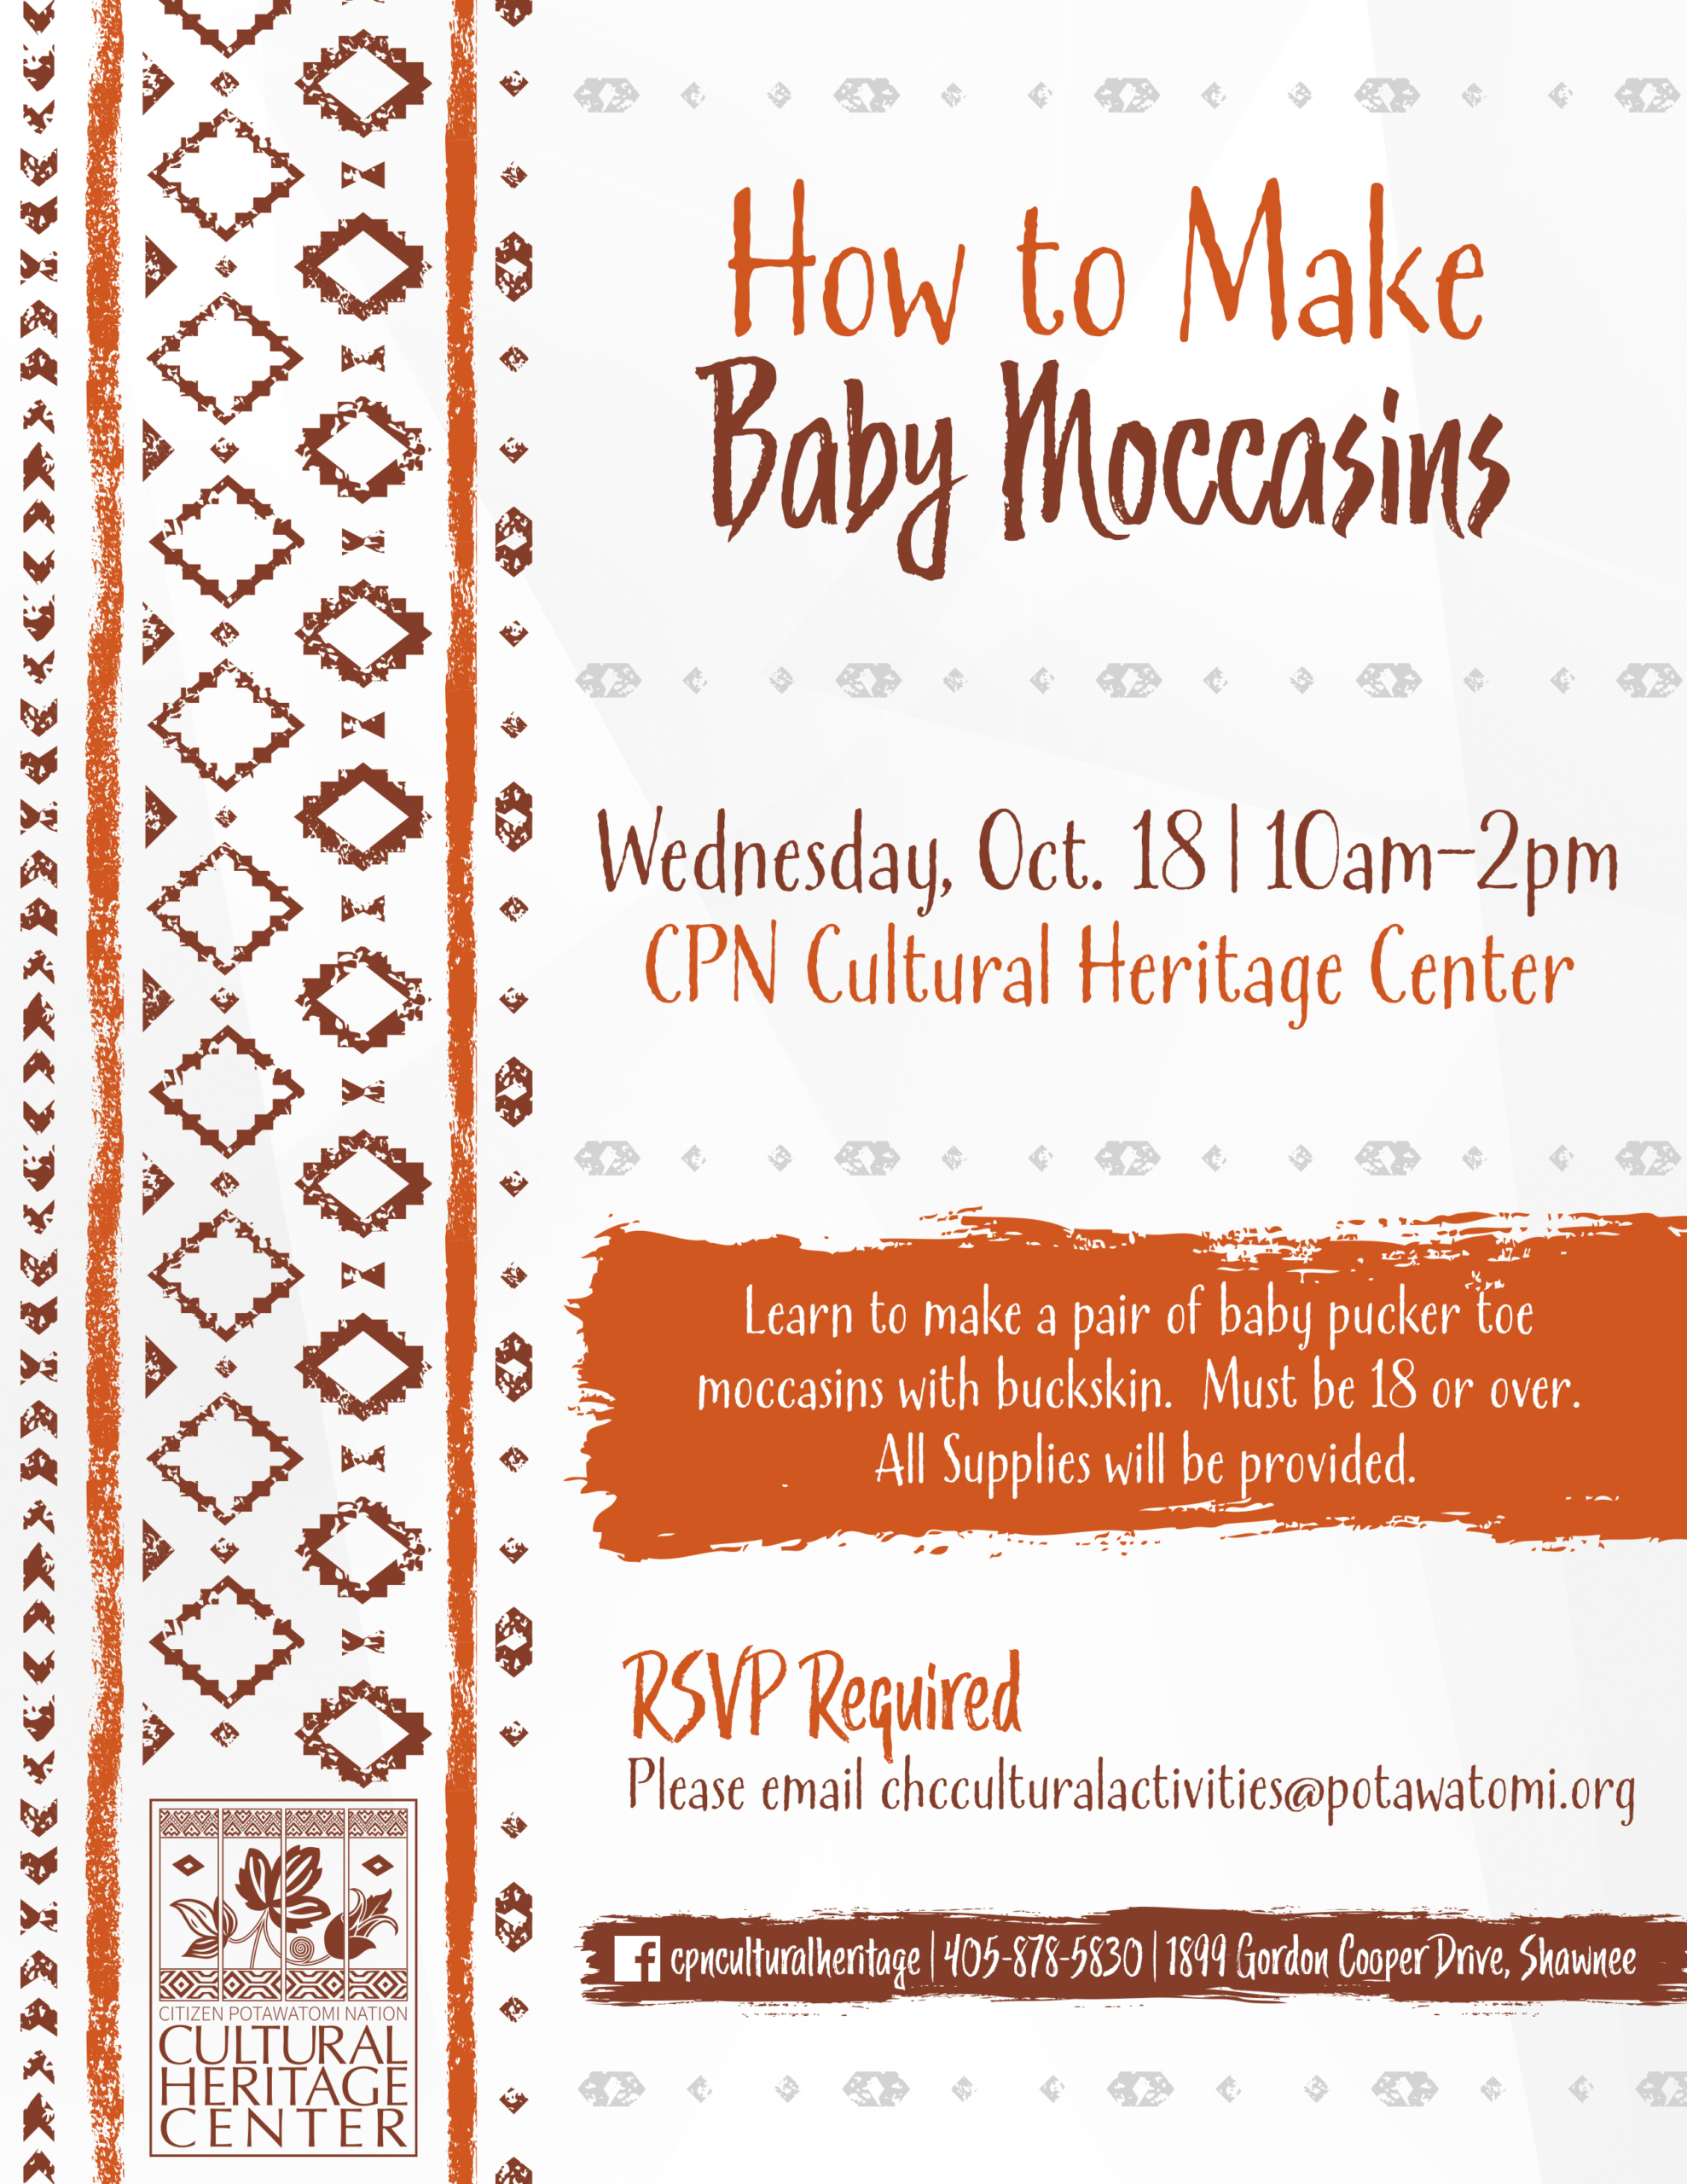 Brick red and pumpkin orange geometric patterns frame class details for the baby moccasin class at the CPN CHC on October 18, 2023.